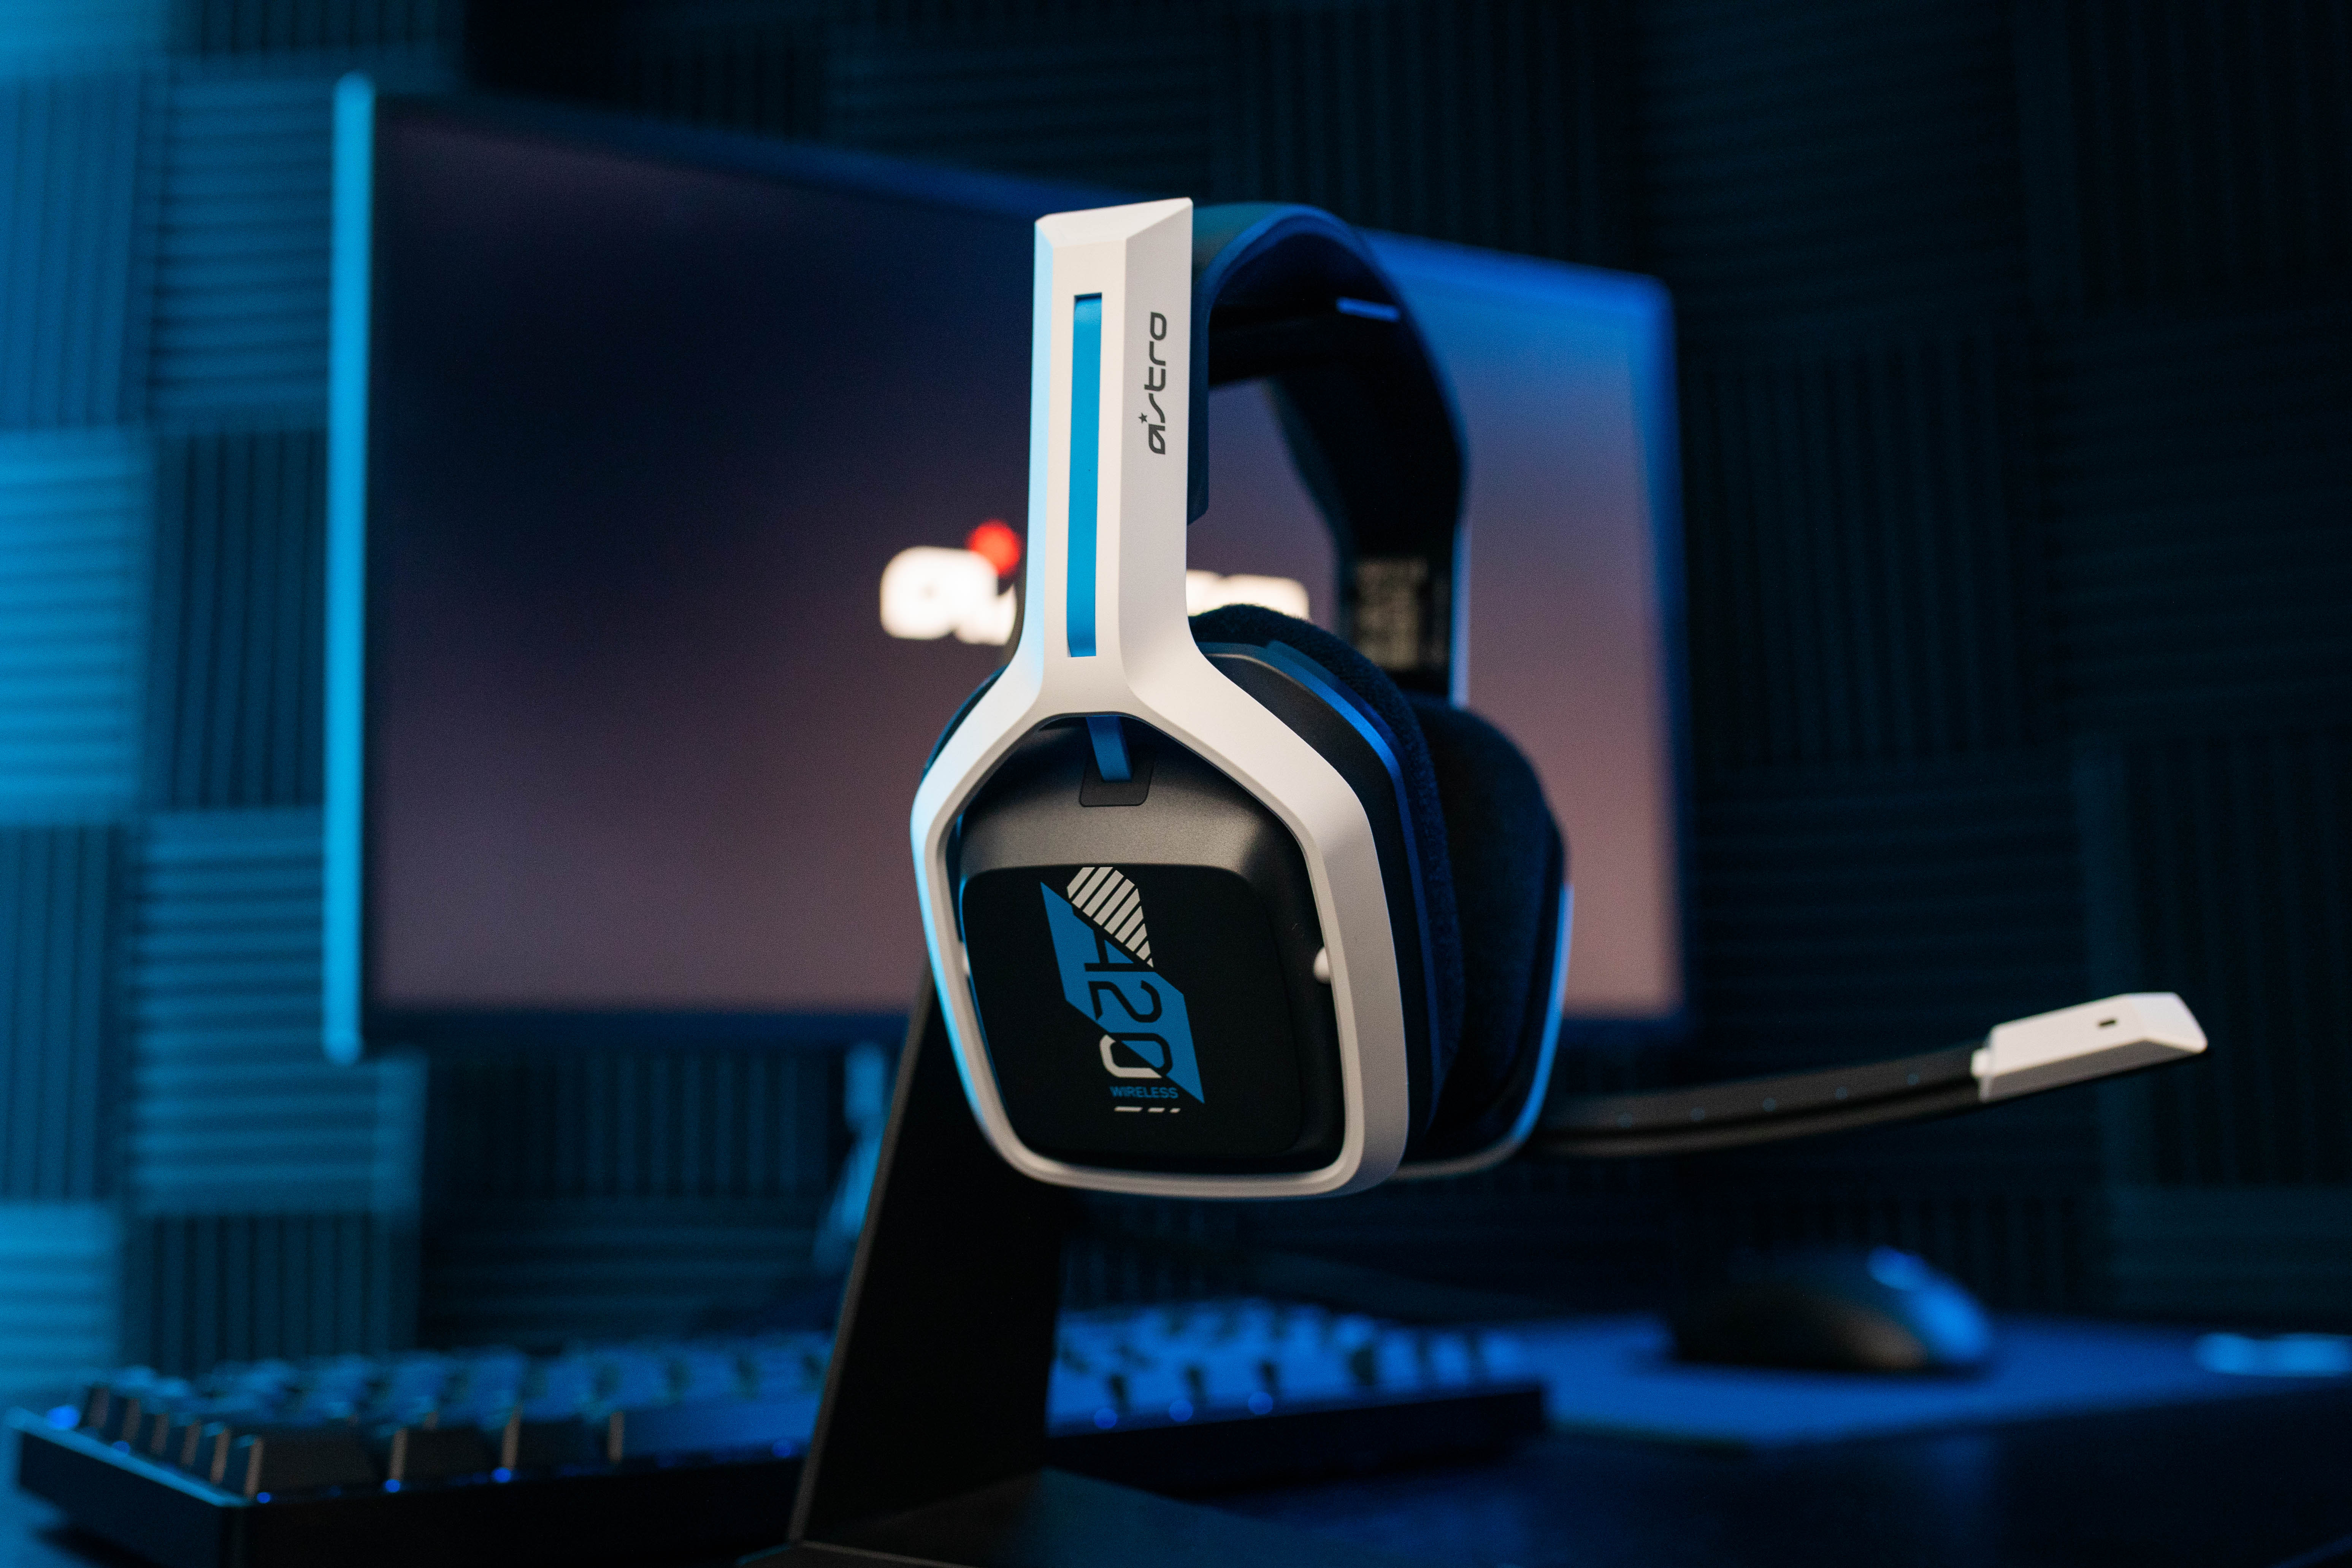 astro playstation headset